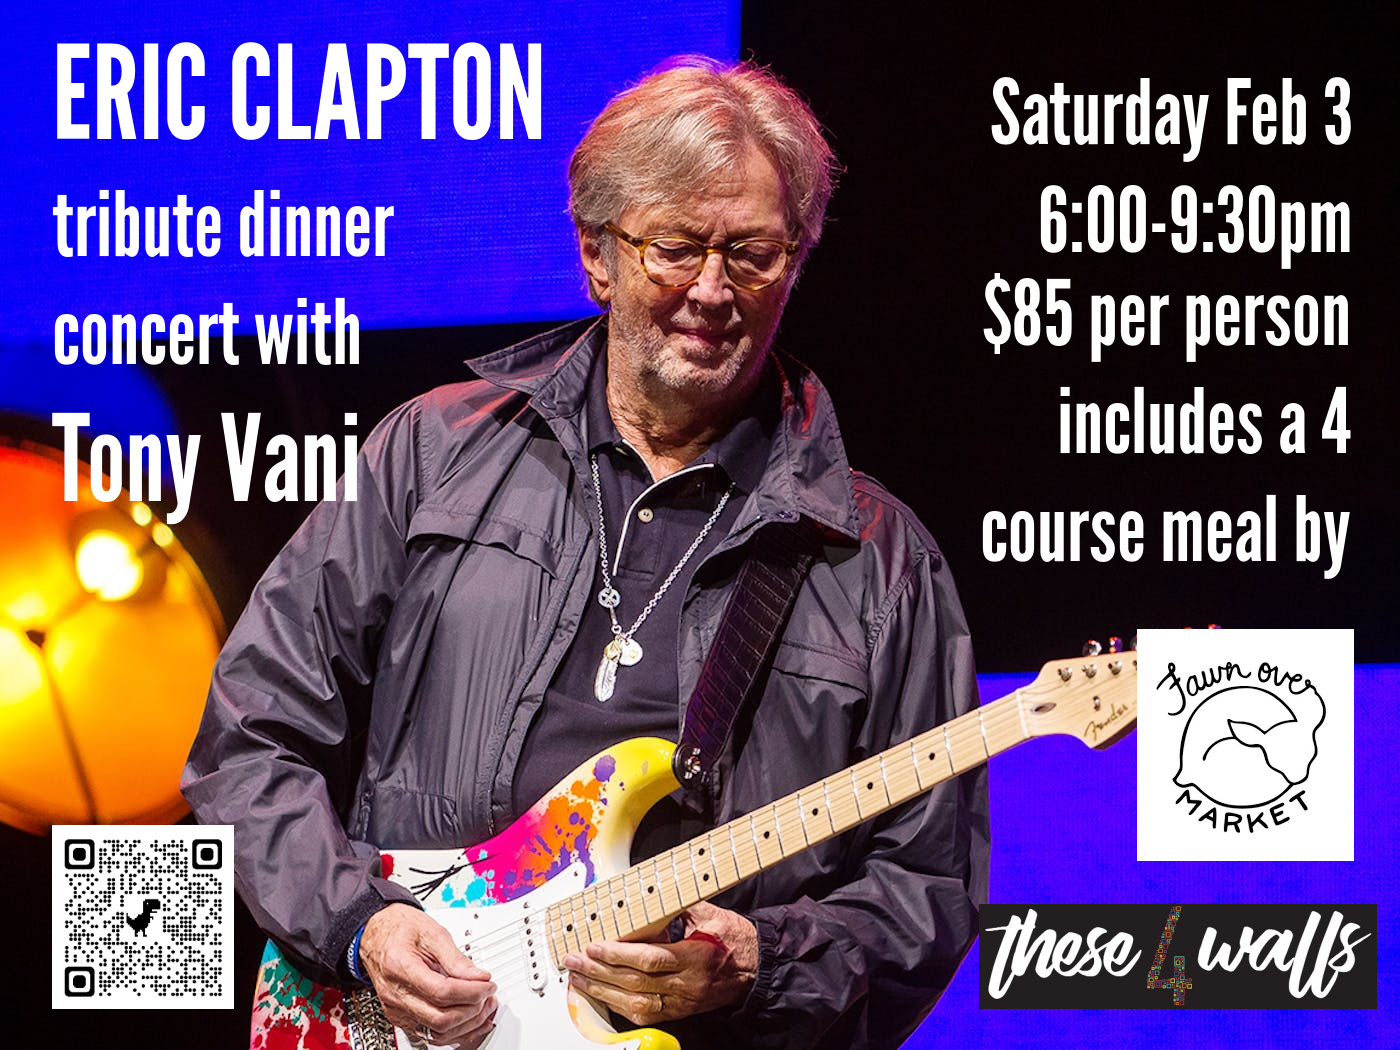 poster featuring picture of Eric Clapton playing electric guitar with event details.